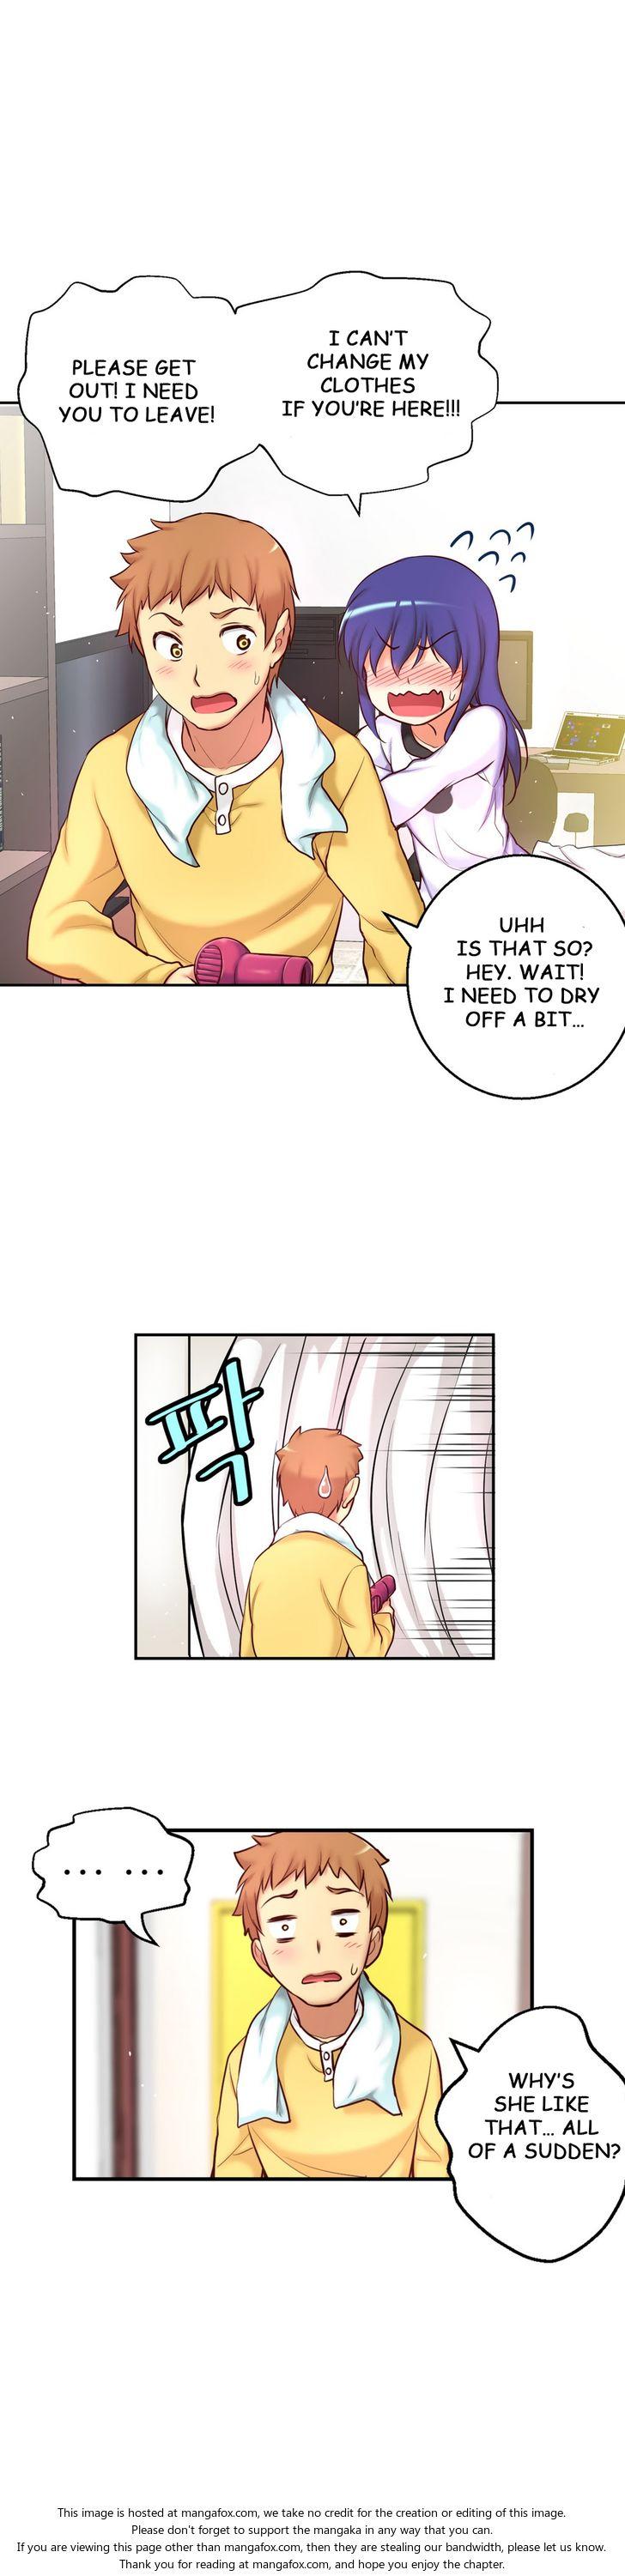 [Donggul Gom] She is Young (English) Part 1/2 678